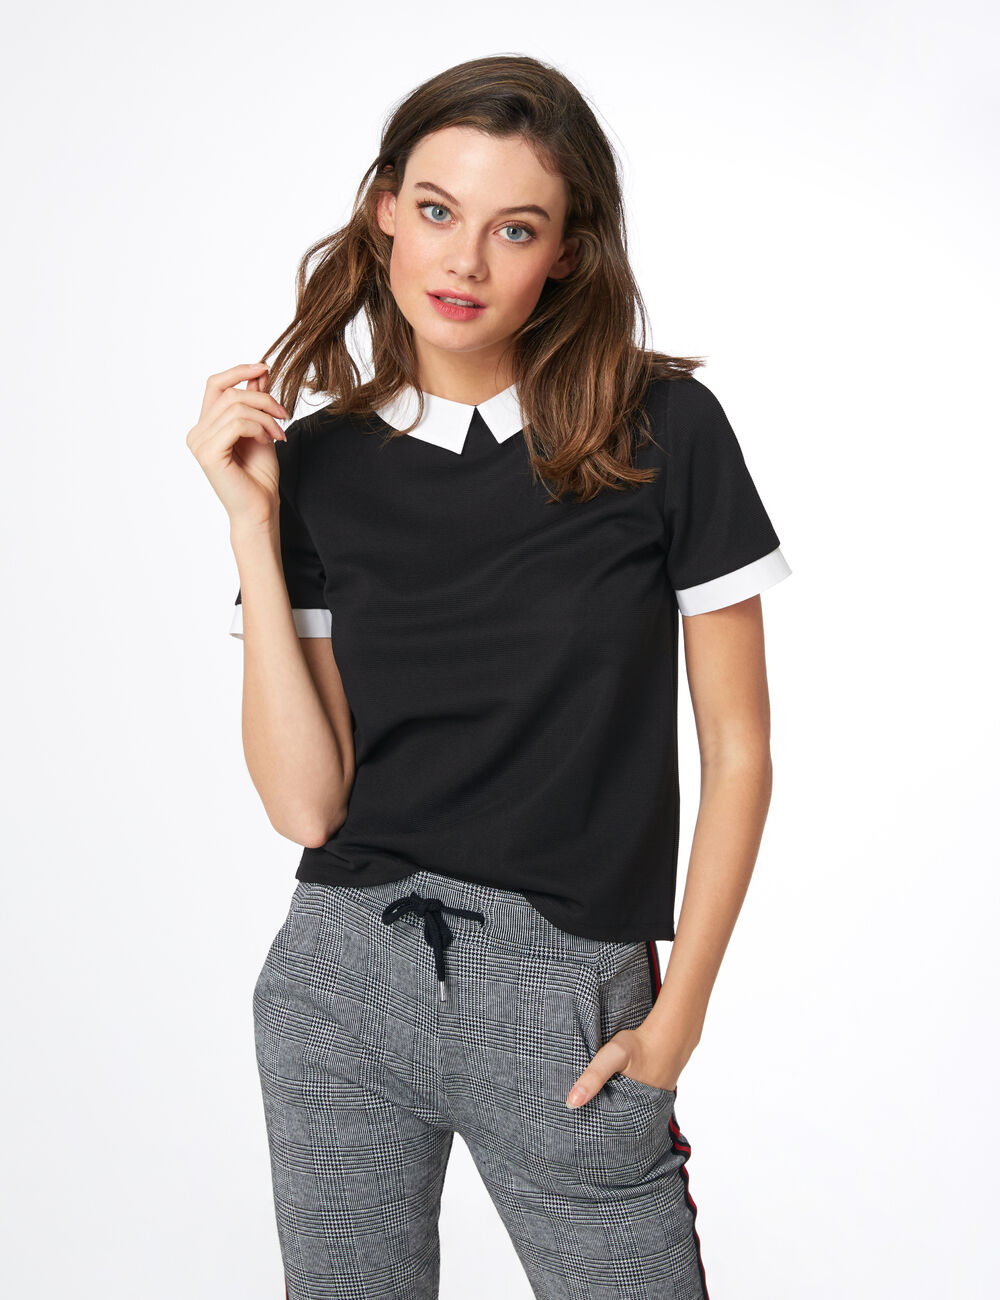 Awesome Black Shirt With White Collar Learn more here!